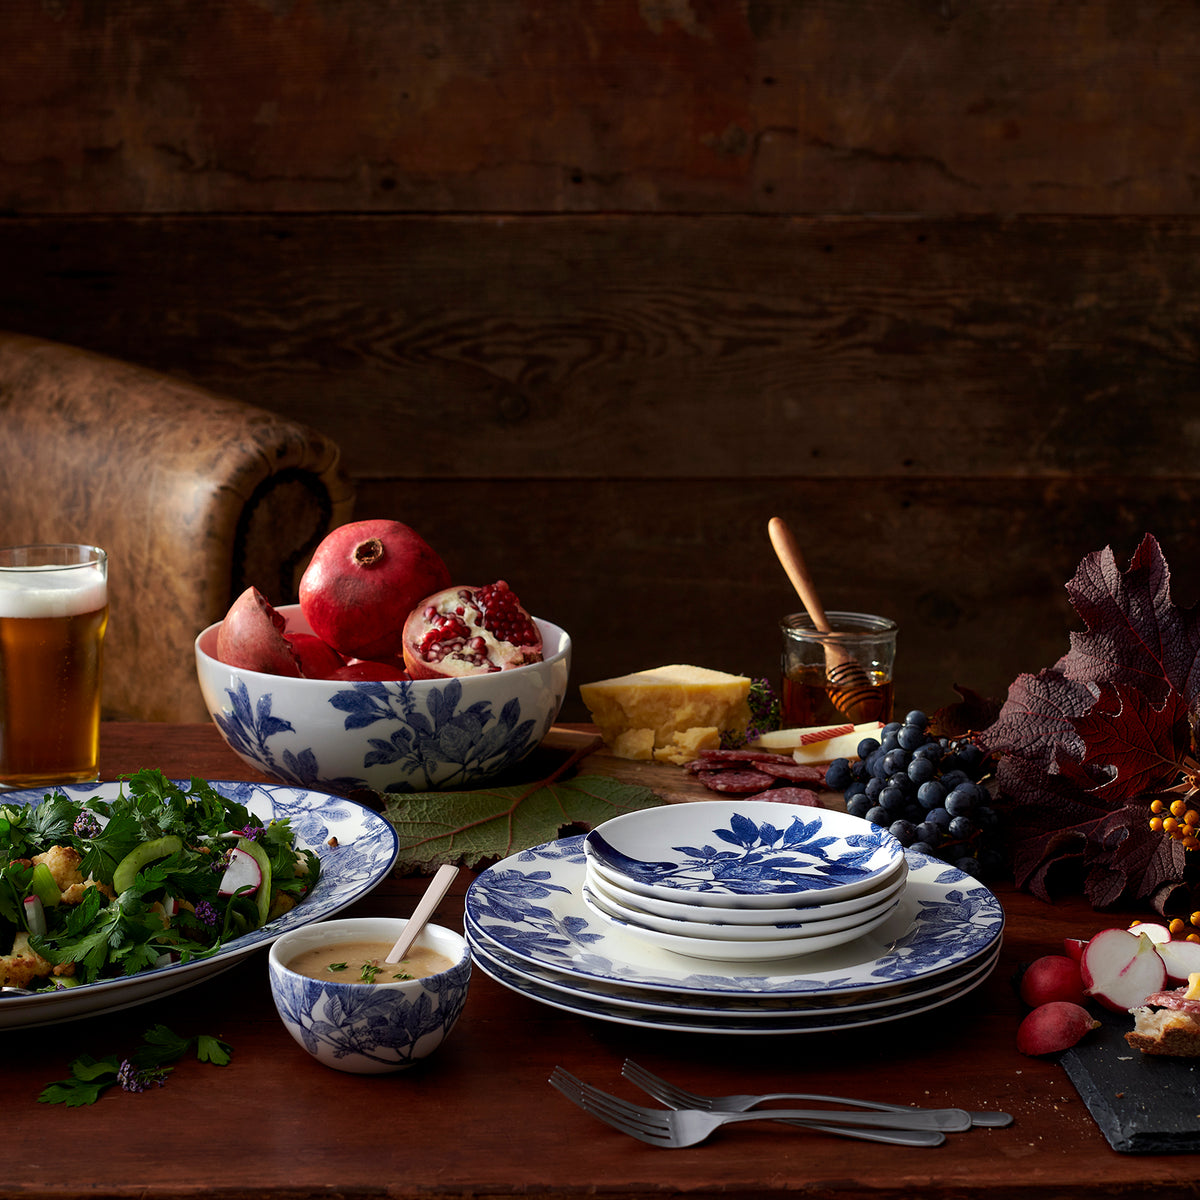 A rustic wooden table setting with Arbor Blue Birds Small Plates by Caskata Artisanal Home featuring botanical details, a salad, pomegranate, grapes, cheese, a beer, utensils, and various garnishes. This heirloom-quality dinnerware adds an elegant touch to any meal.